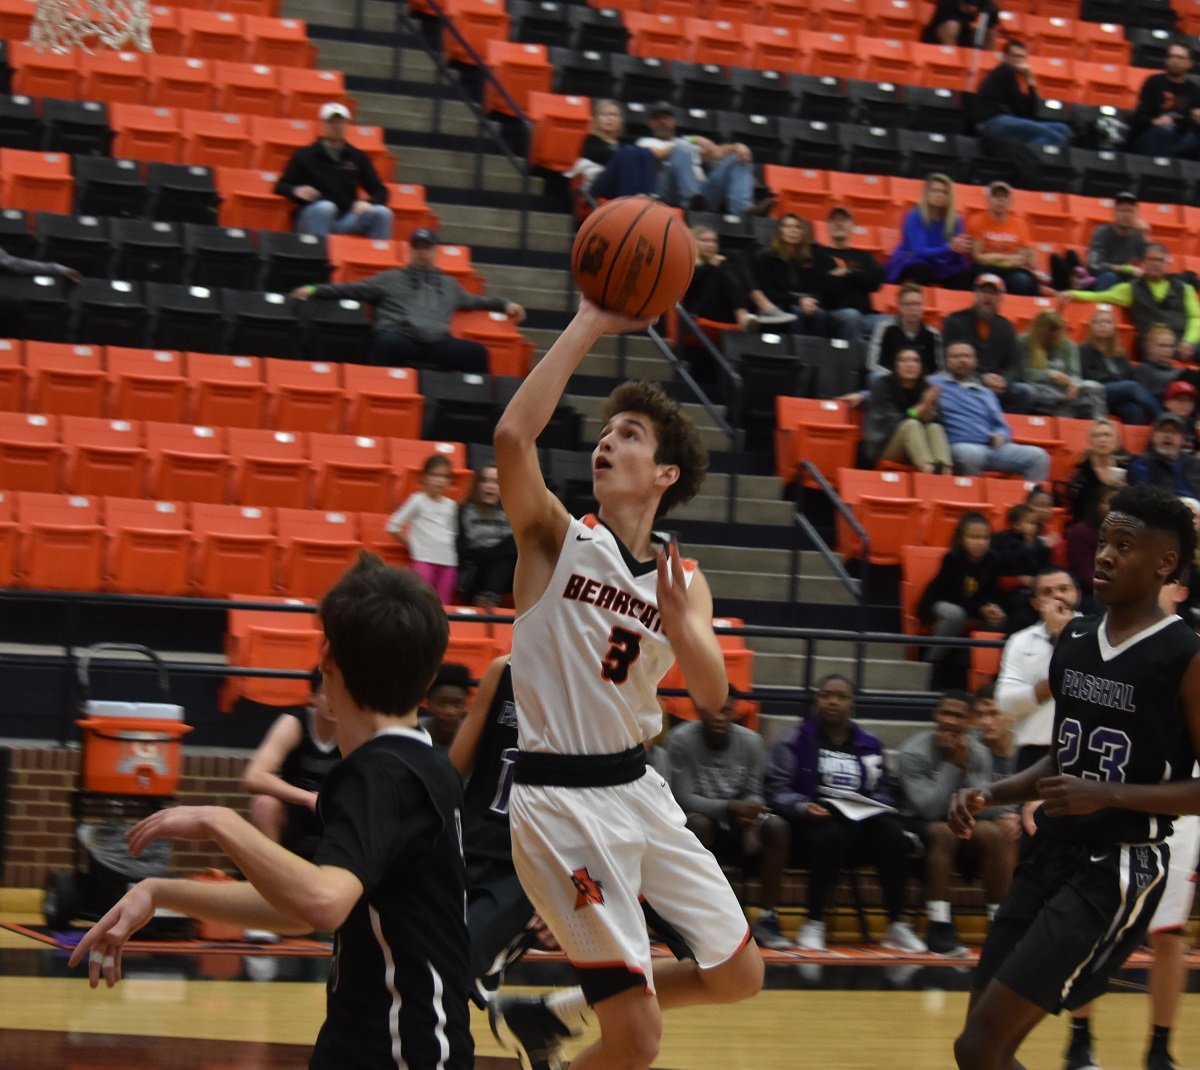 Aledo senior guard Leo Bell drives to the basket Thursday night during the Bearcats' 52-49 loss to Paschal. Photo by Tony Eierdam